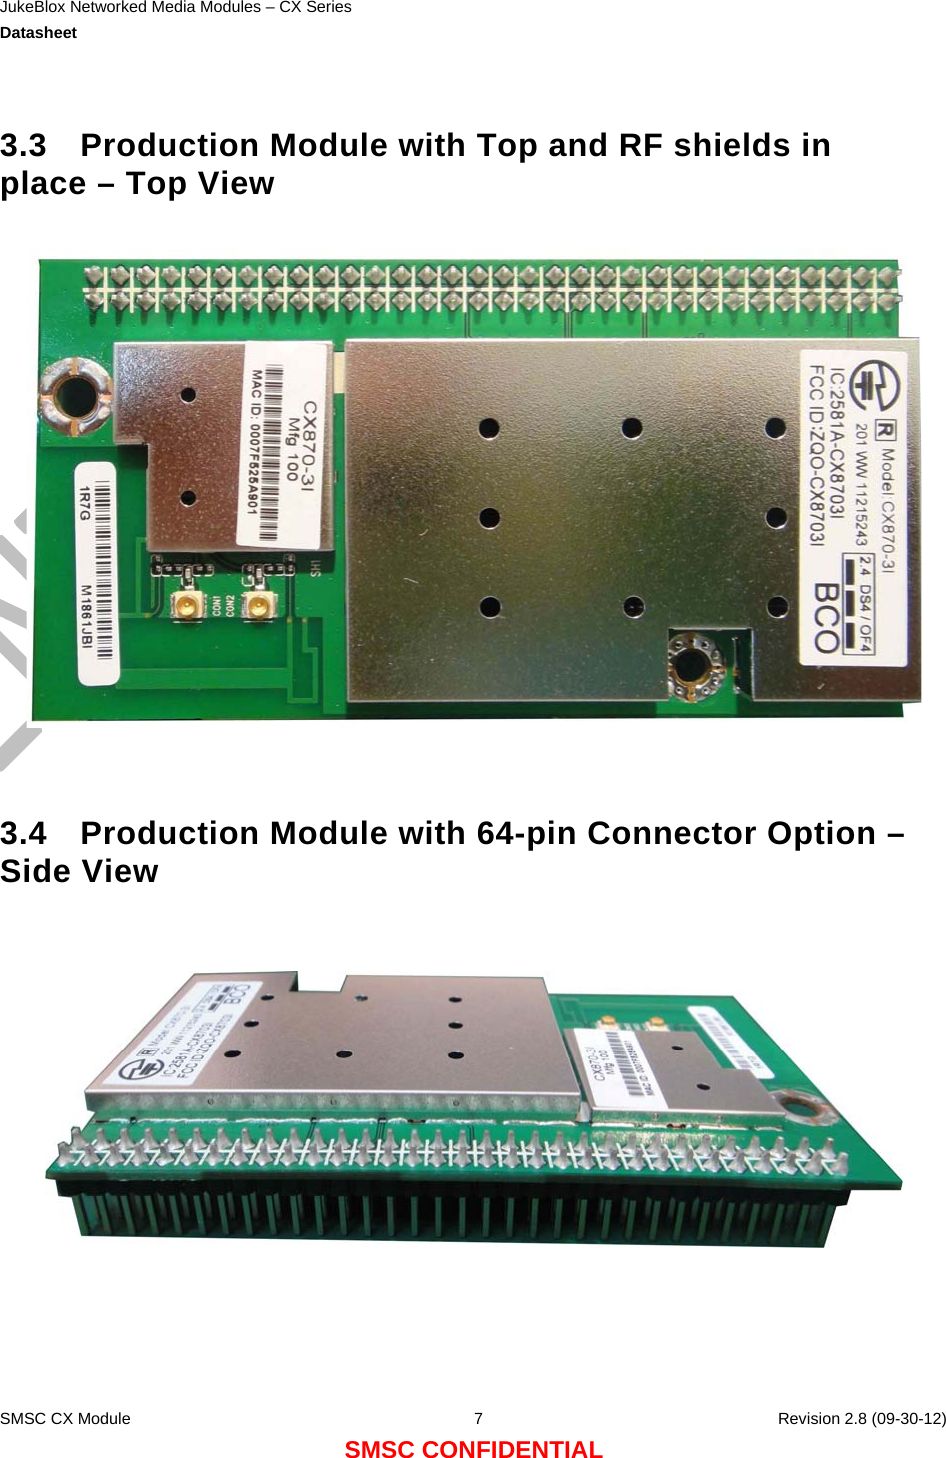 JukeBlox Networked Media Modules – CX Series  Datasheet    SMSC CX Module  7    Revision 2.8 (09-30-12) SMSC CONFIDENTIAL  3.3  Production Module with Top and RF shields in place – Top View     3.4  Production Module with 64-pin Connector Option – Side View   